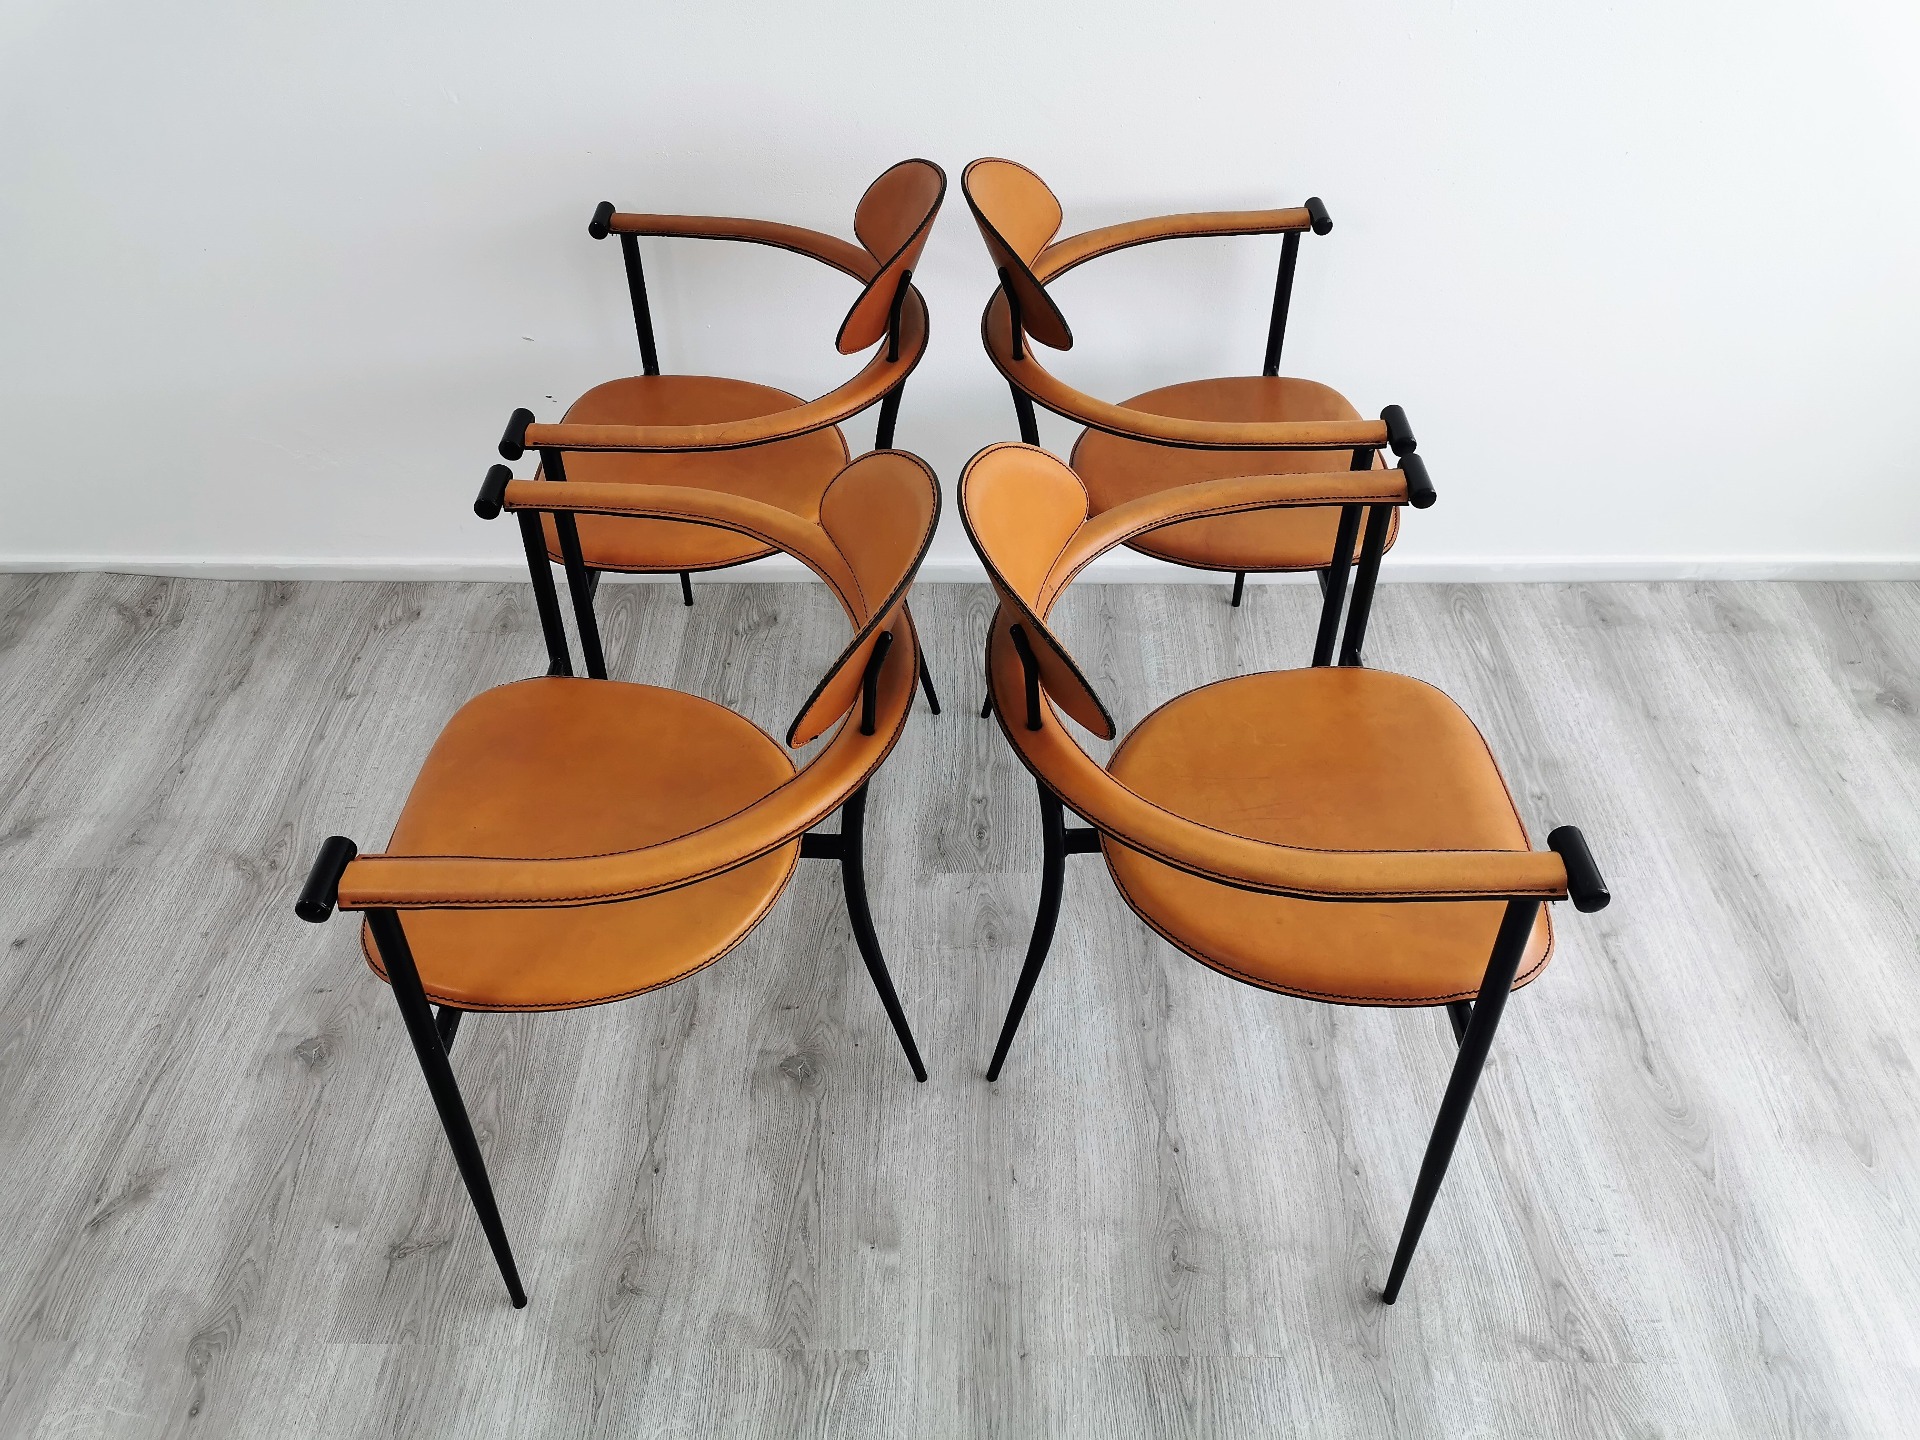 Italian Dining Chairs By Arrben Italy. - Sold - Vintro-Design